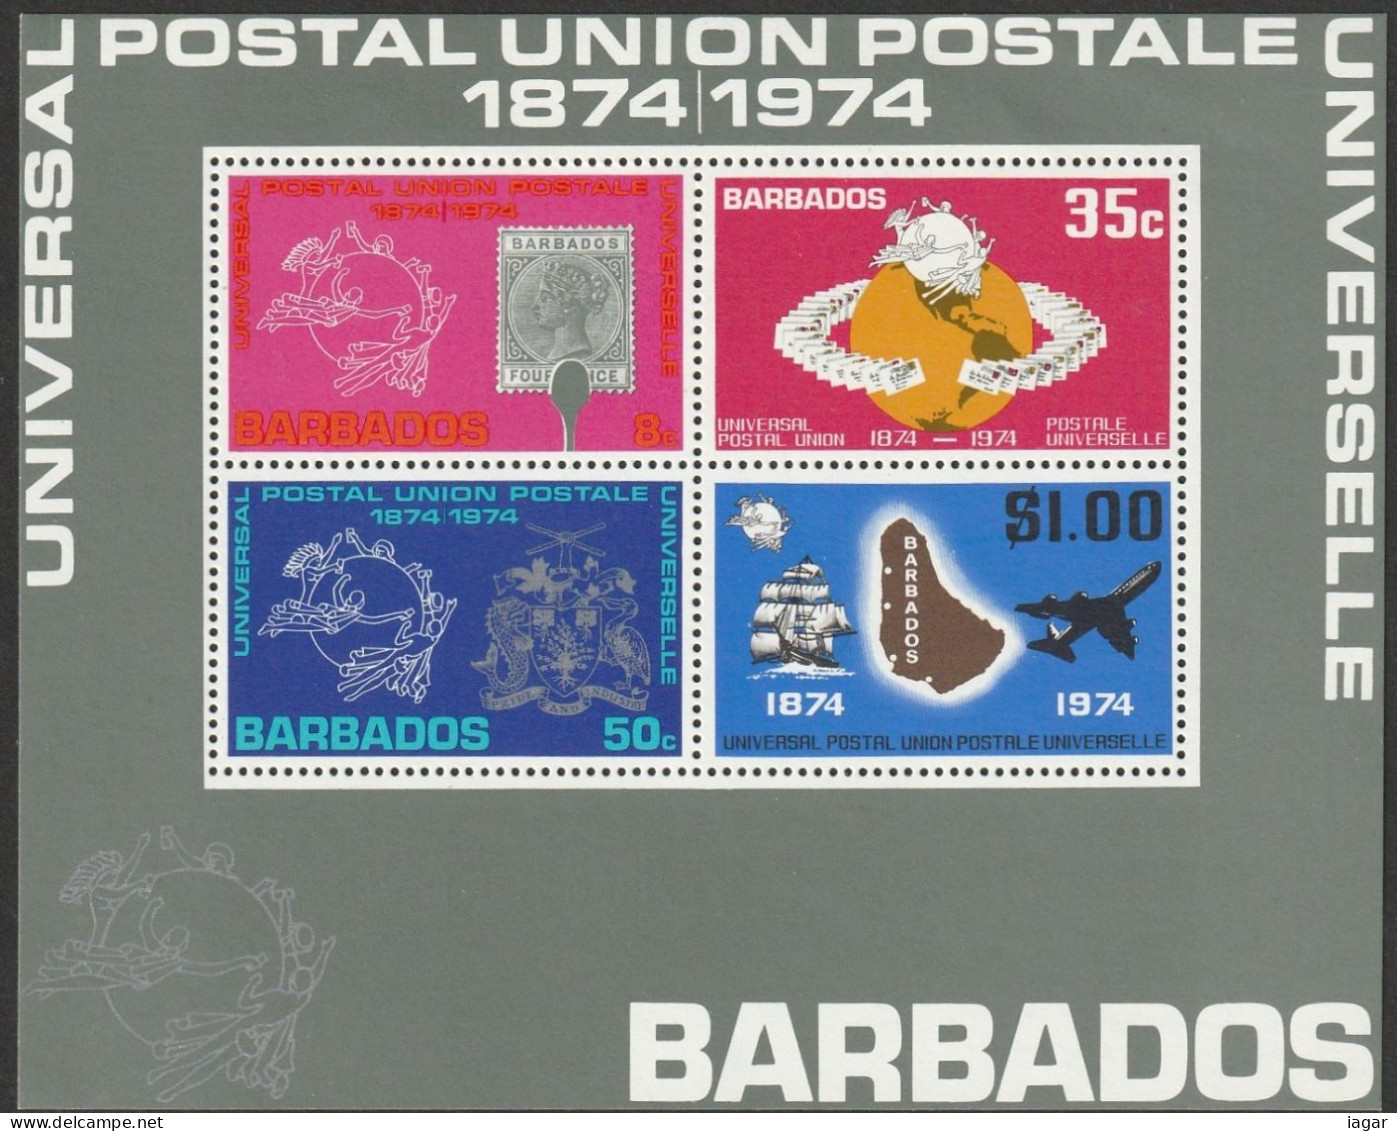 THEMATIC PHILATELY:  STAMP ON STAMP, U.P.U. EMBLEMS, MAP OF BARBADOS, LETTERS ENCIRCLING THE GLOBE  4v+MS    -  BARBADOS - U.P.U.